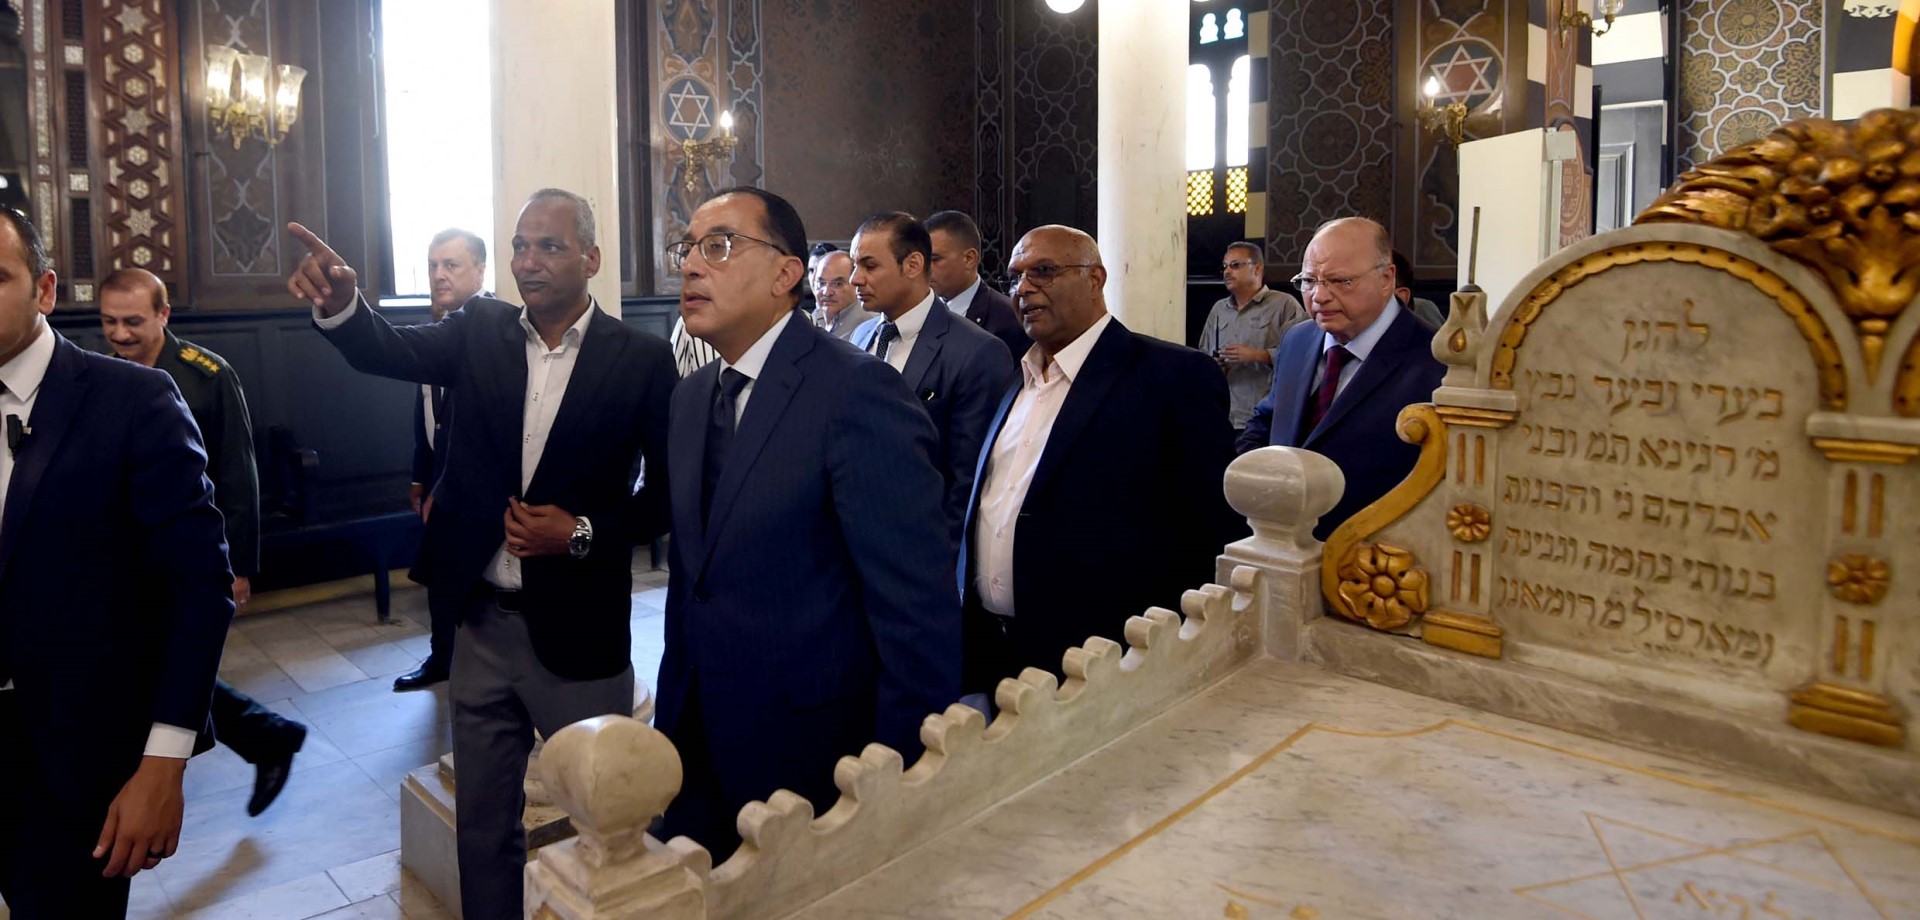 The Prime Minister witnesses the opening of the “Ben Ezra” Temple after the completion of its restoration